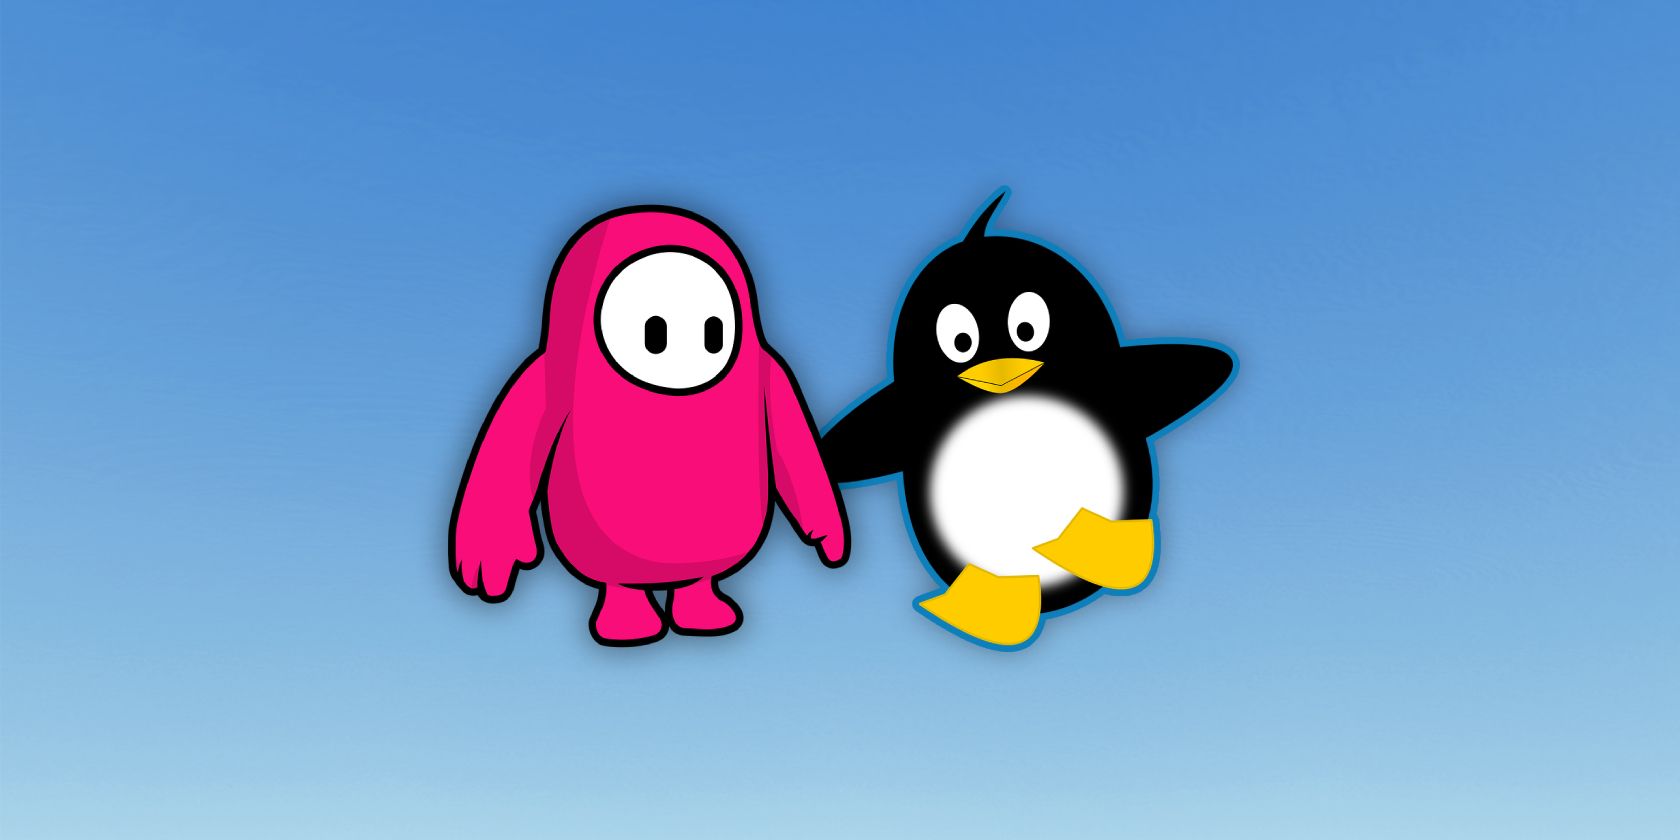 fall guys character and linux tux